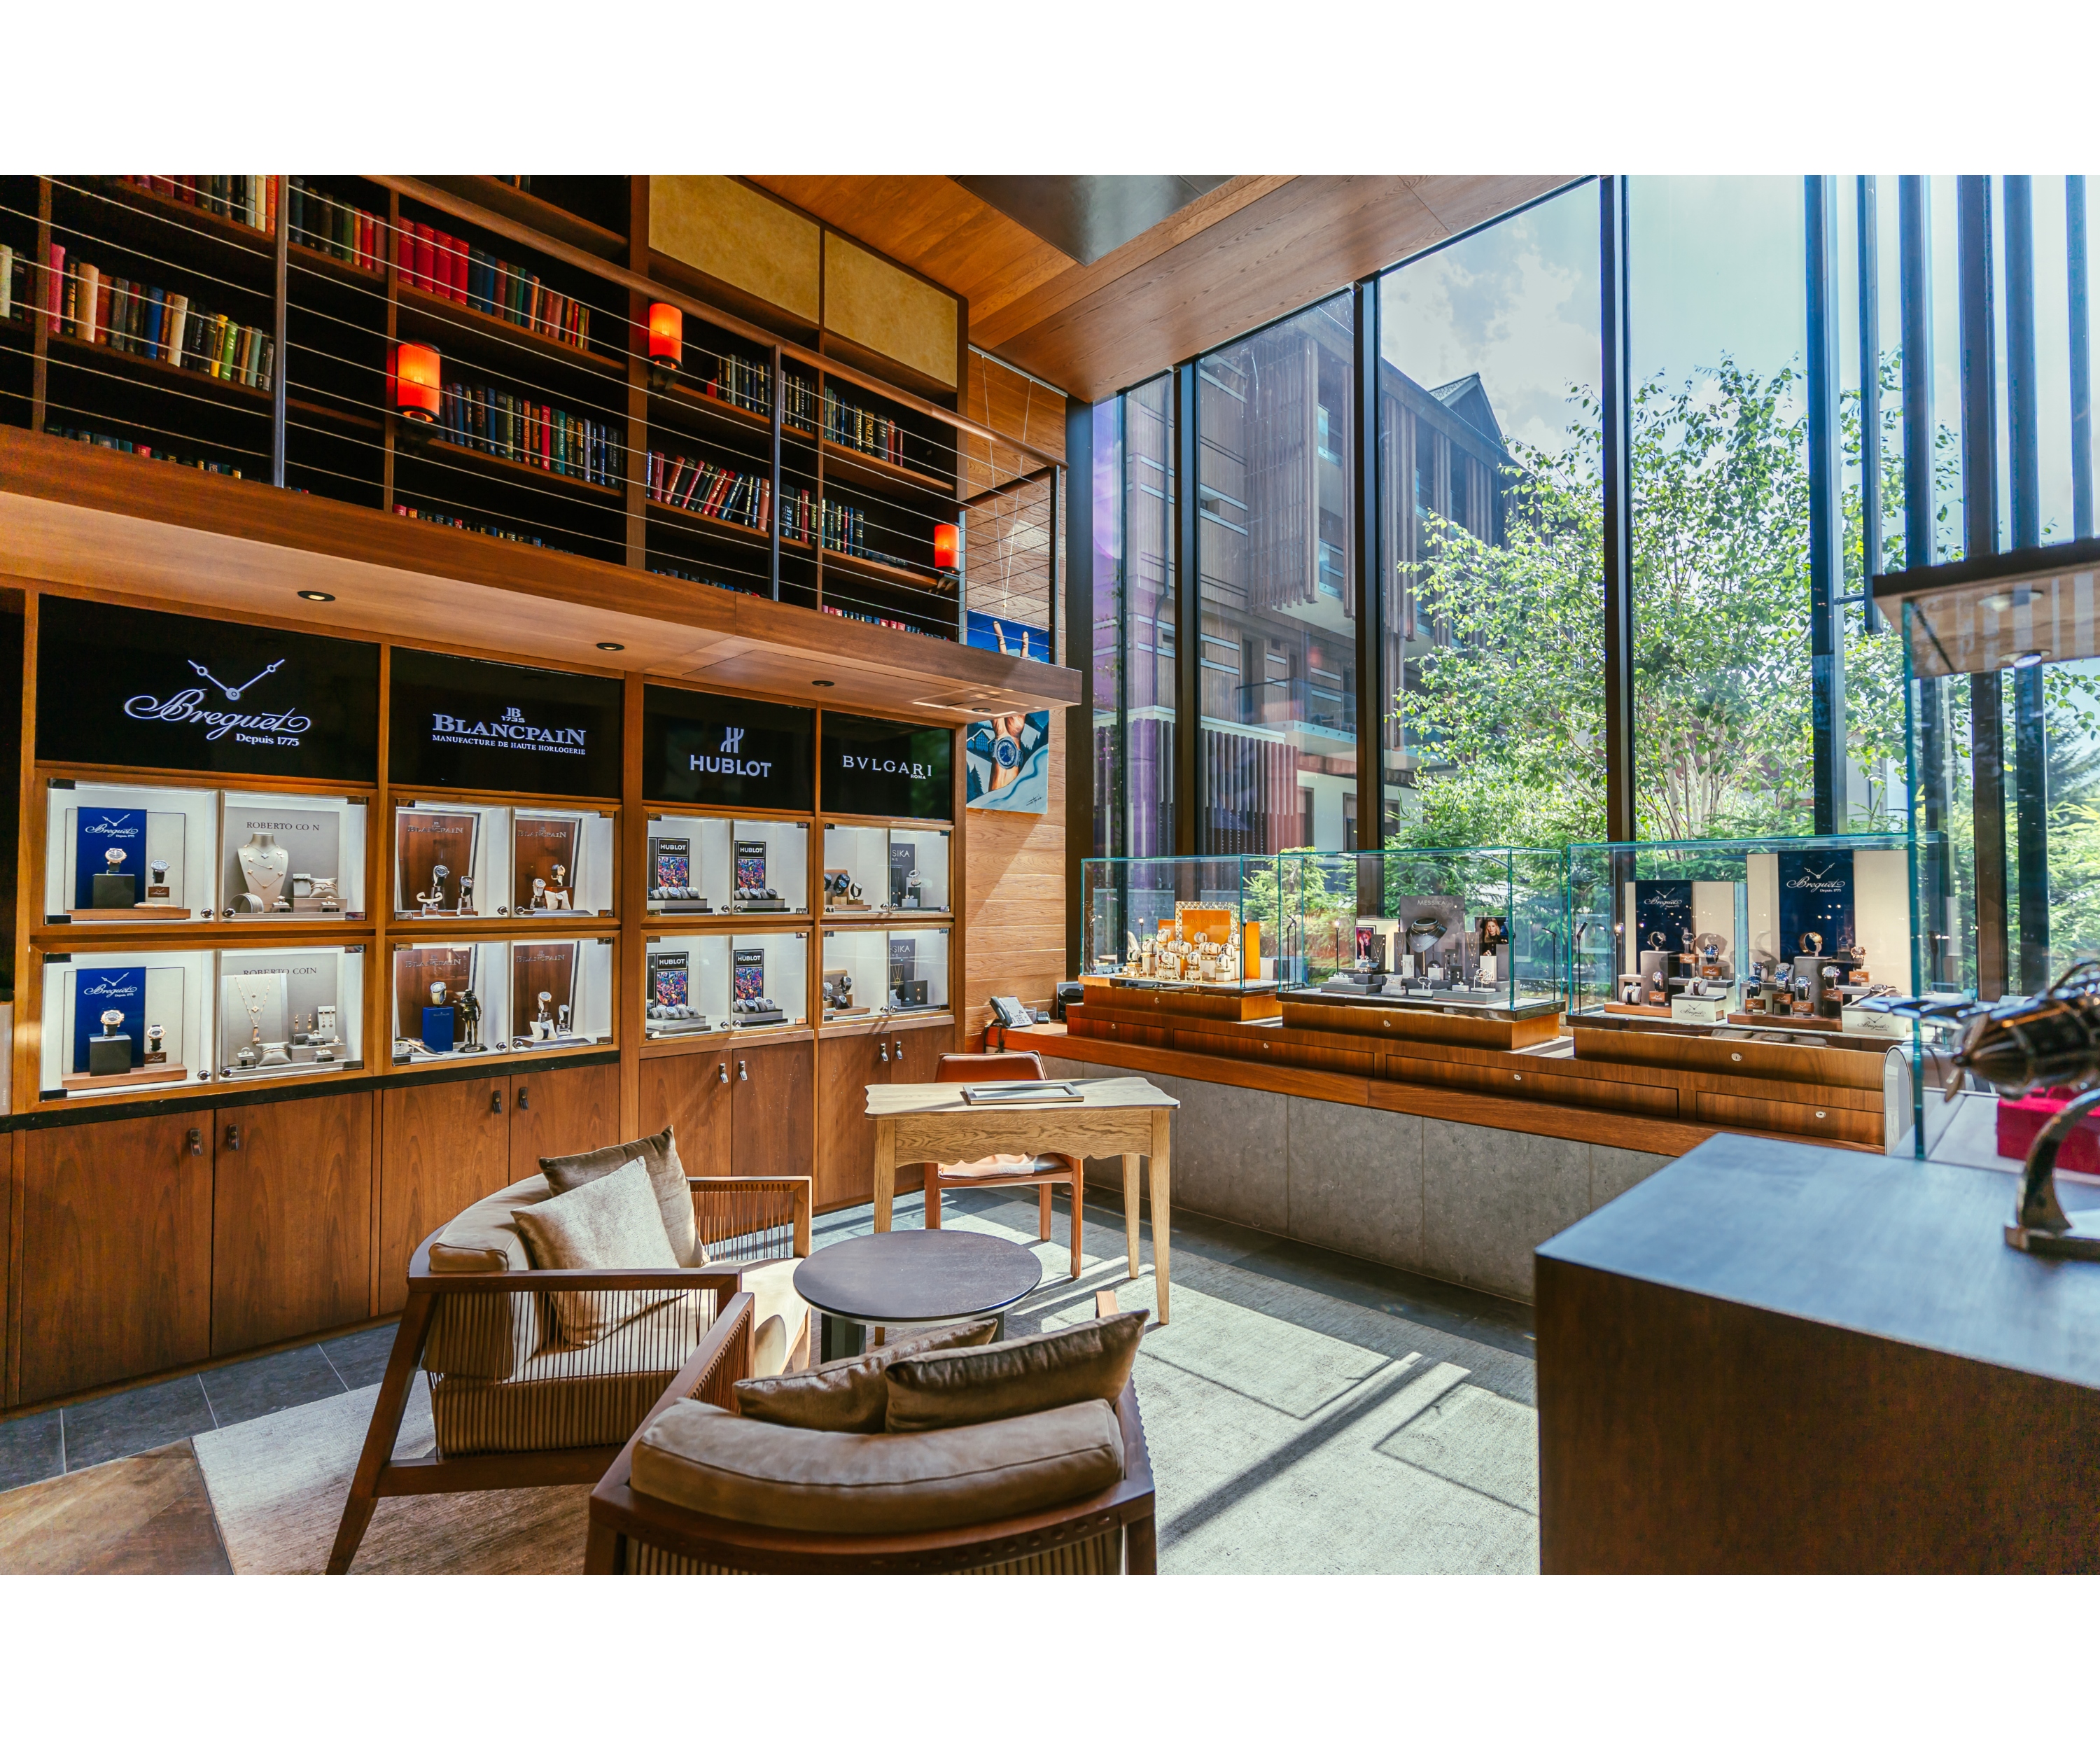 Bright room with large windows & showcases with watches, like in a jeweler's shop.